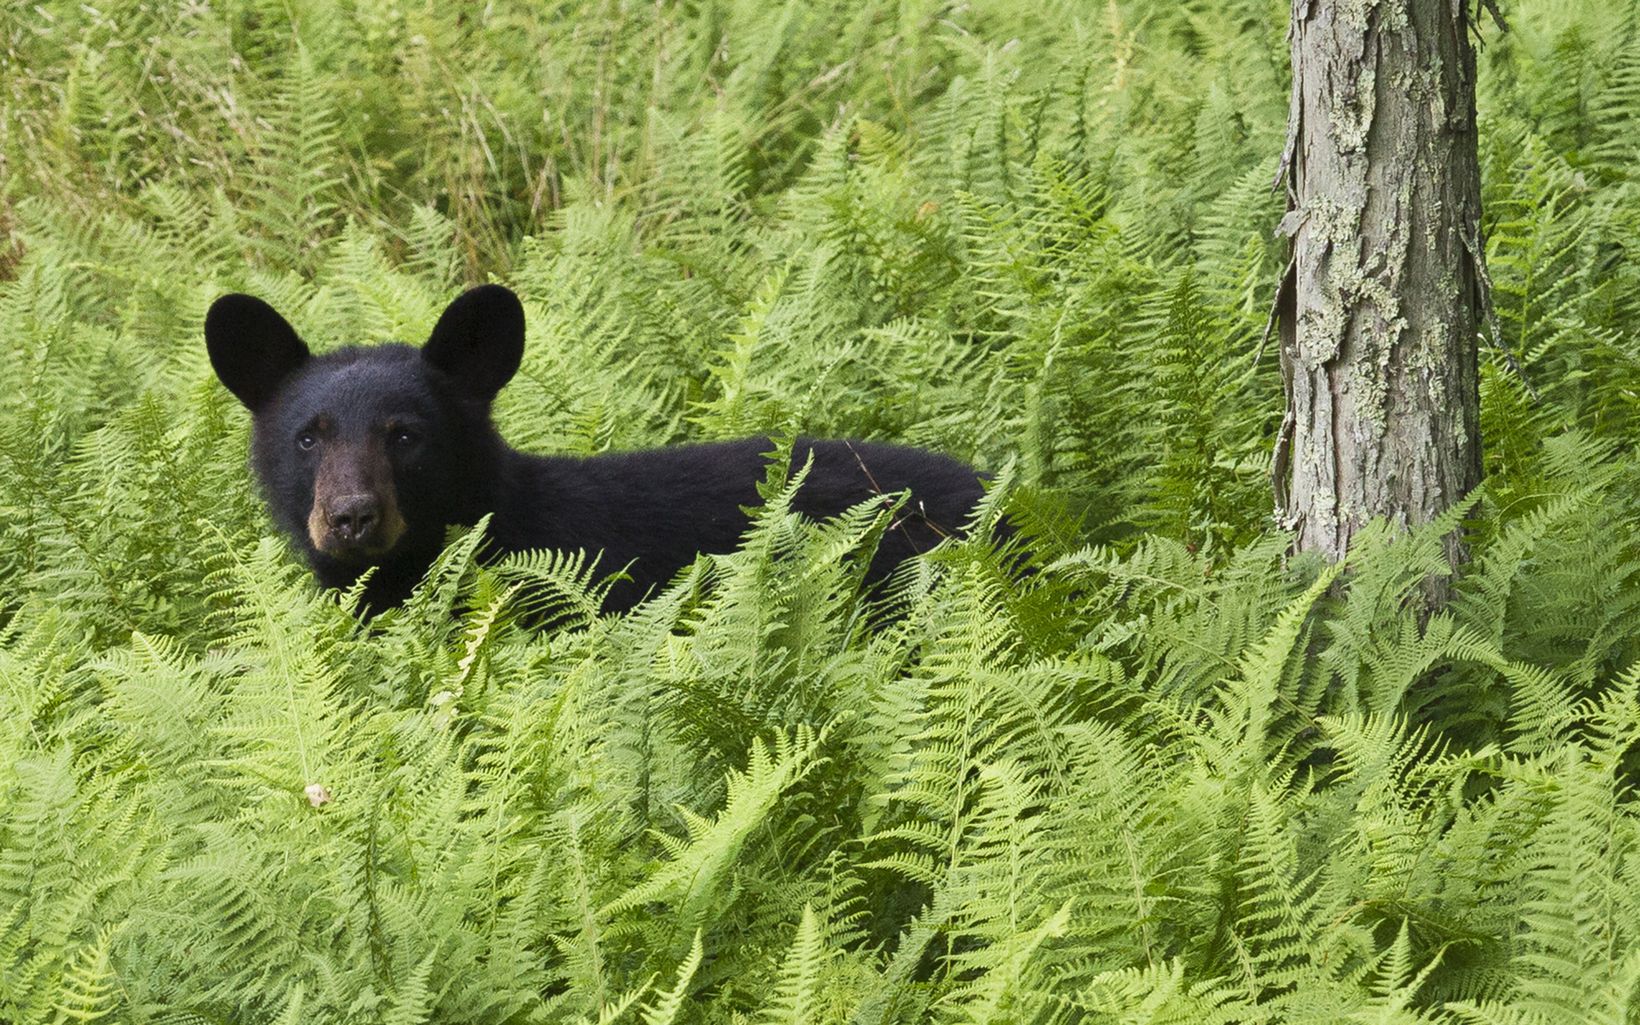 Black bears can be found along the Greenbrier River